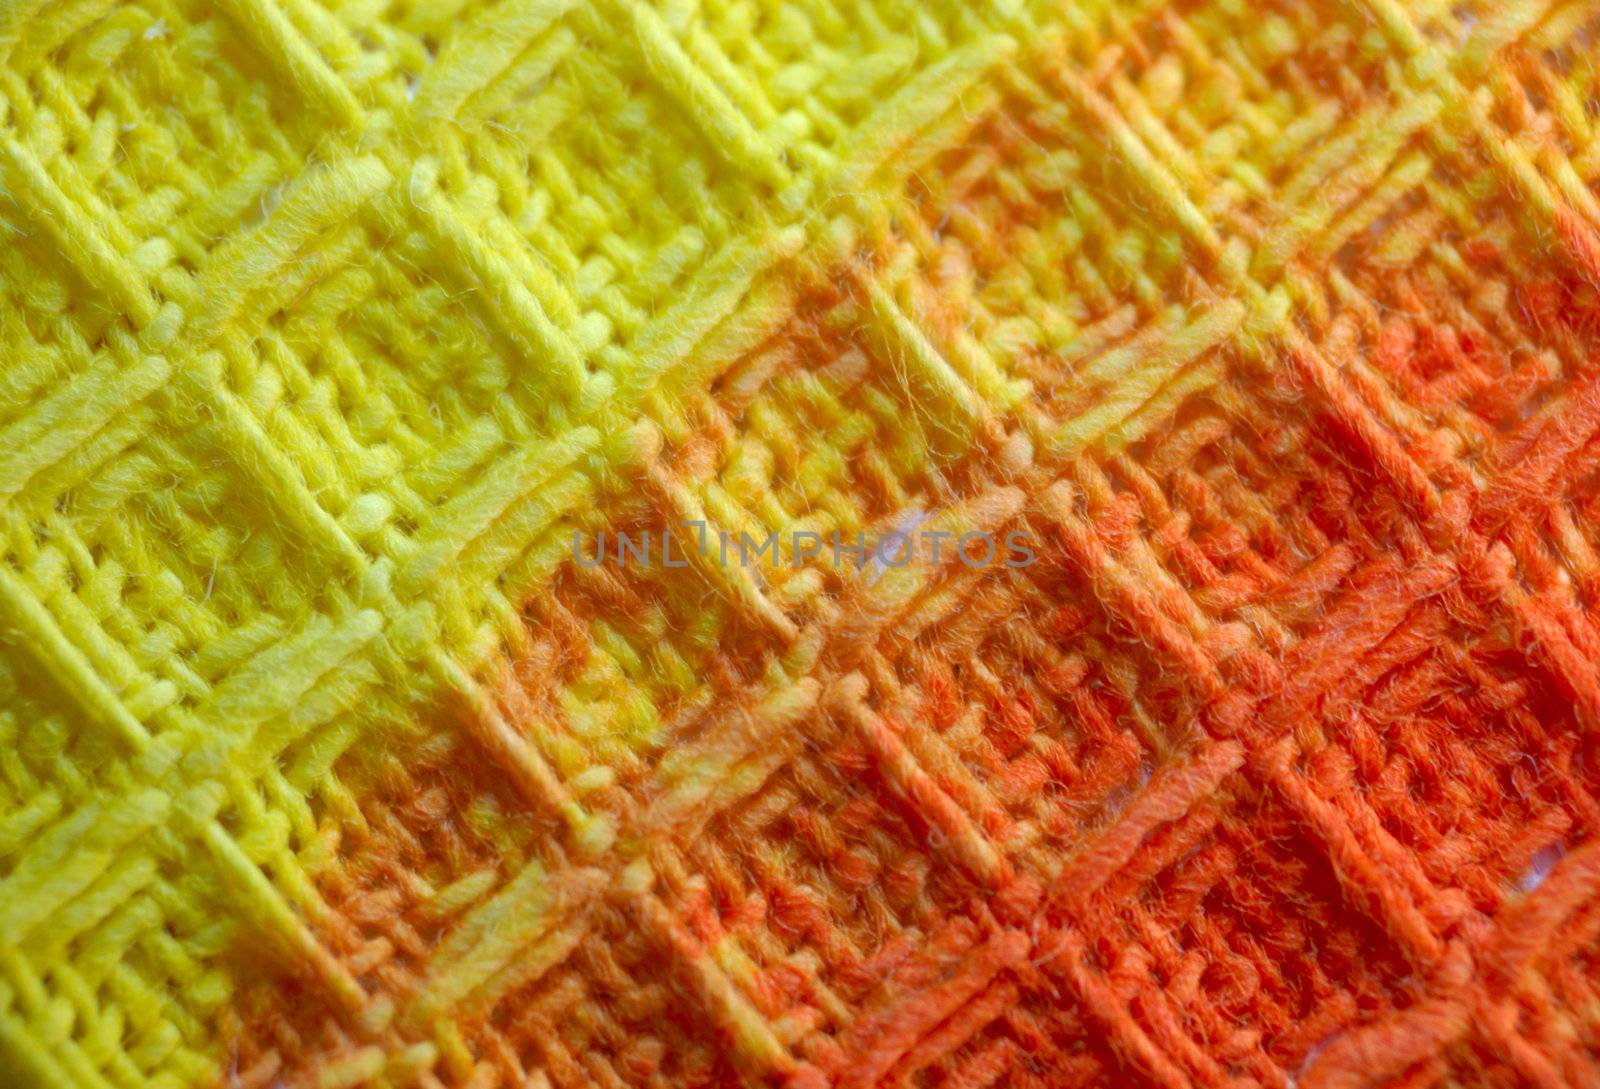 macro pattern of yellow - red textile fabric